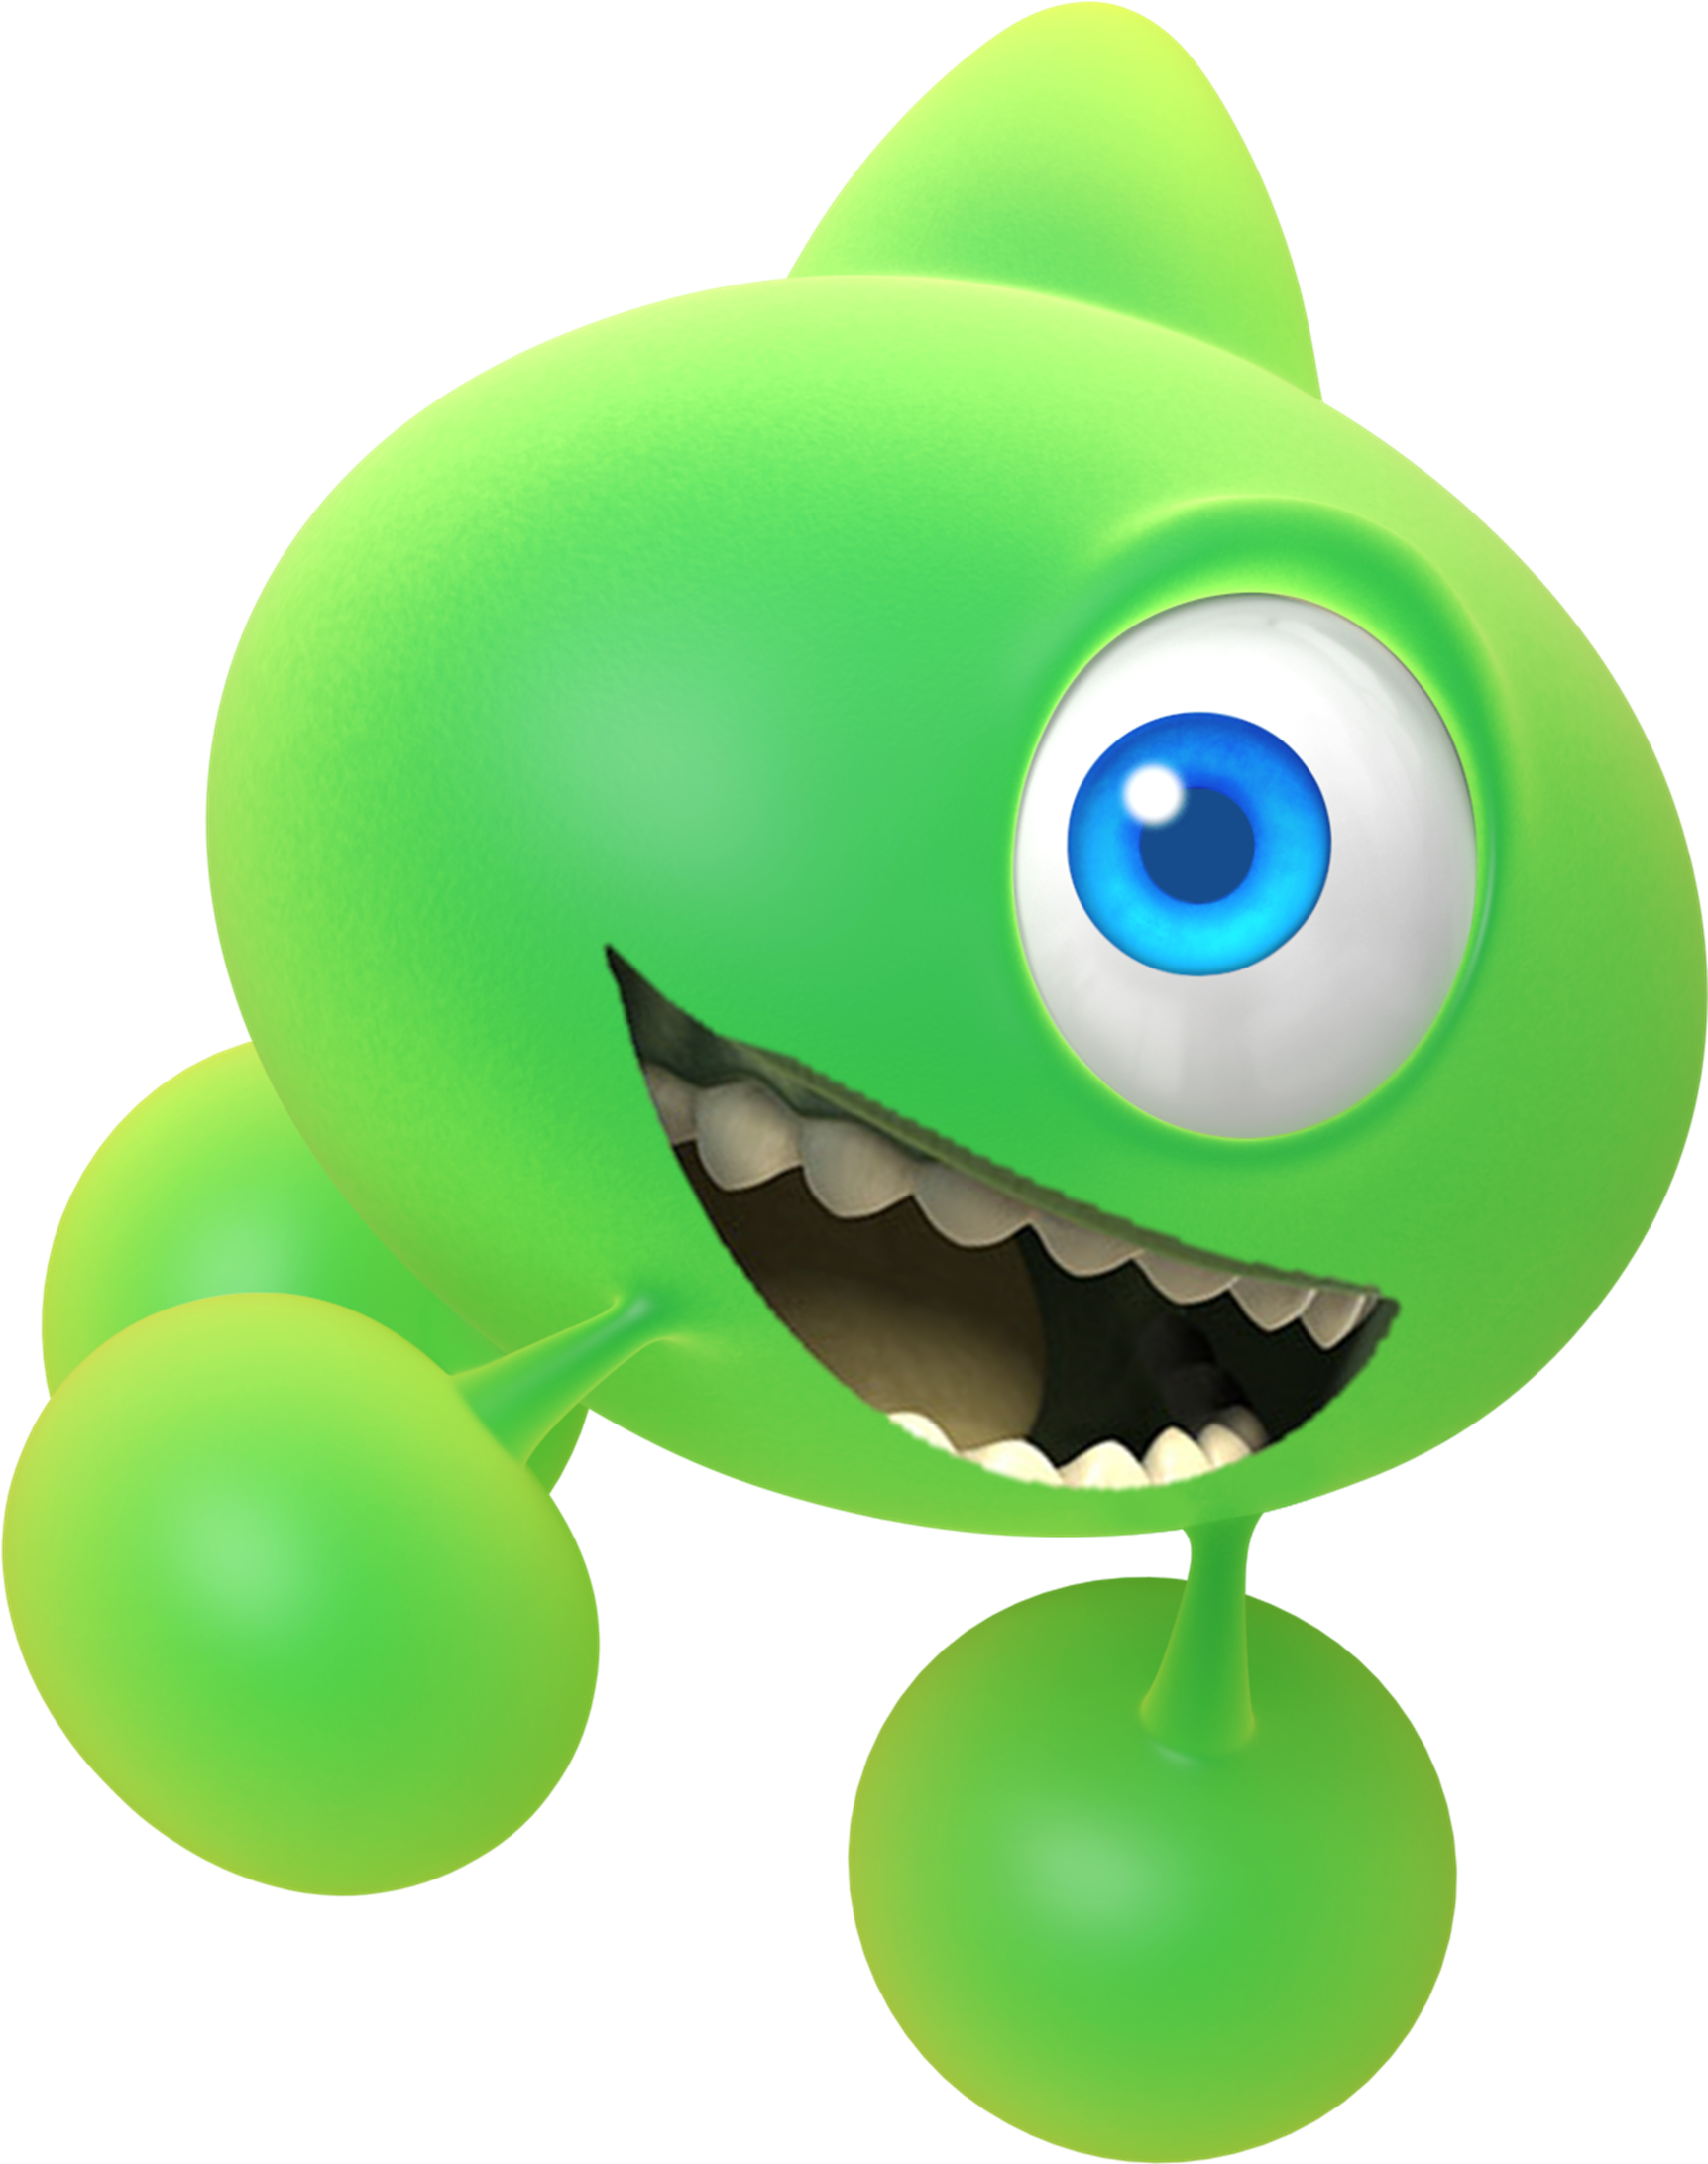 A Green Cartoon Character With A Blue Eye And Mouth PNG